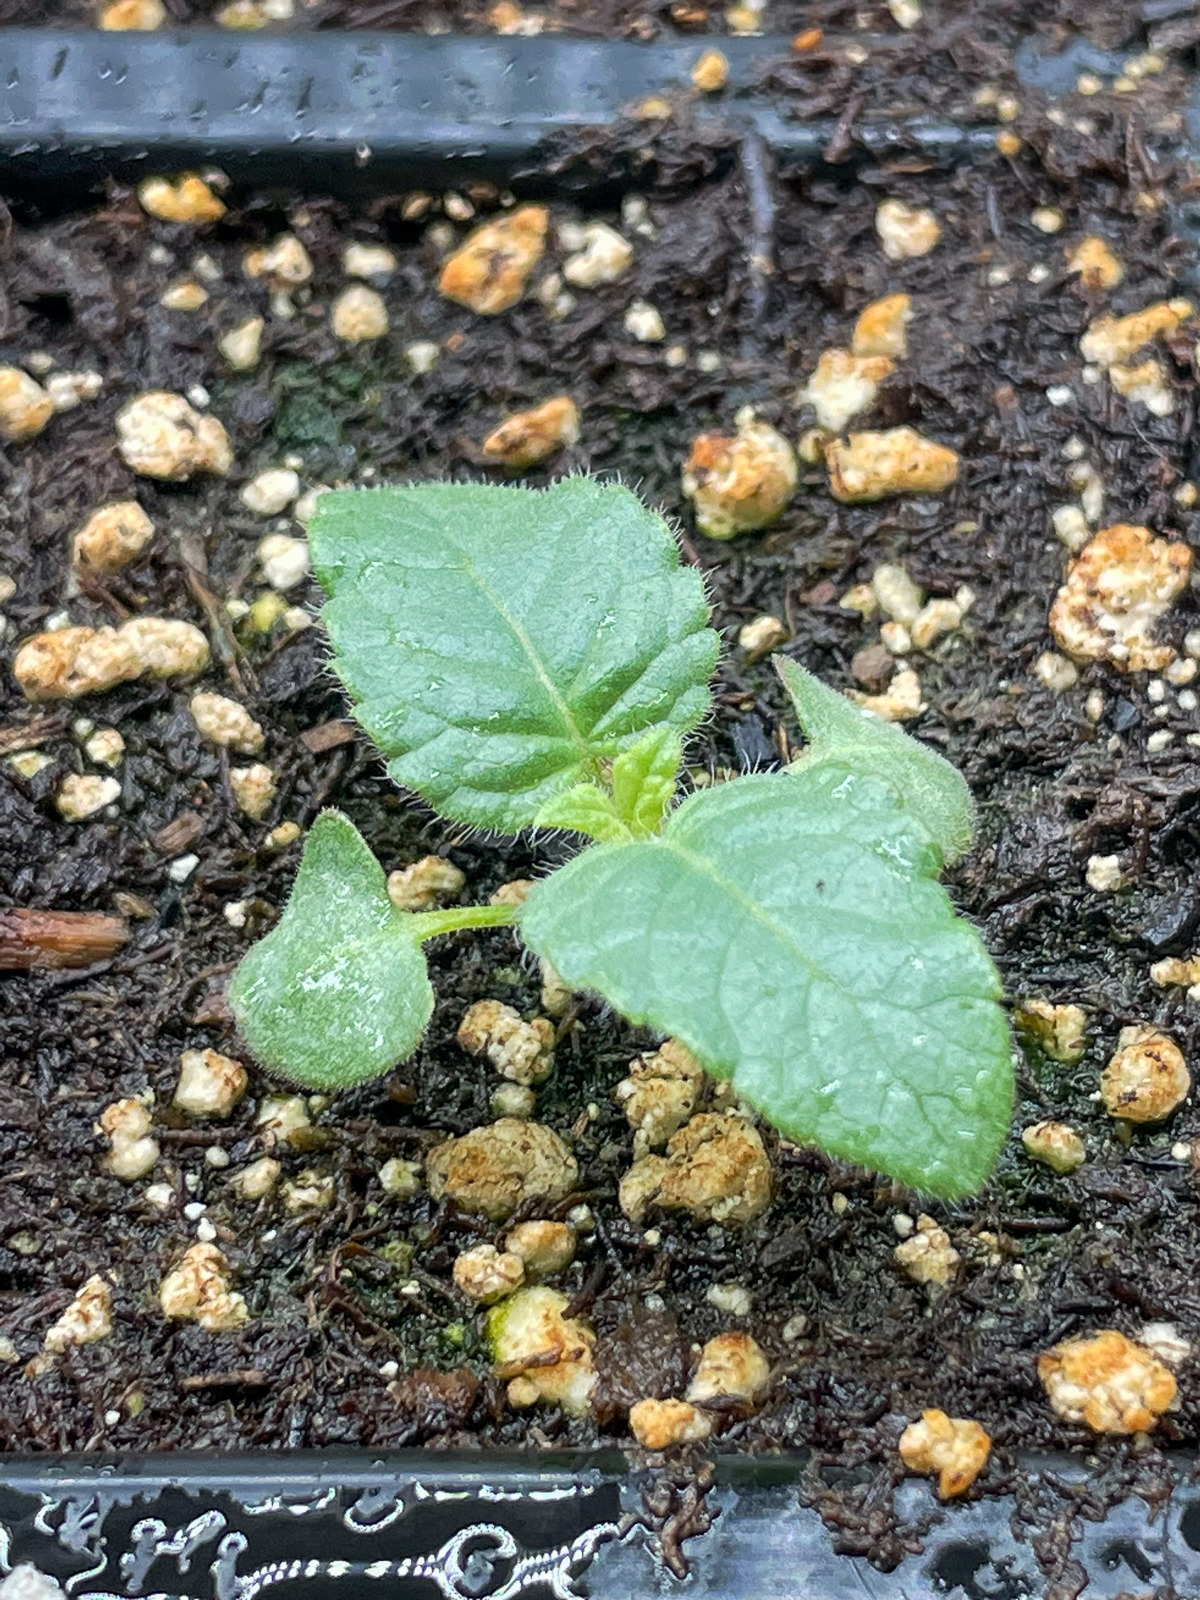 coral nymph salvia seedling